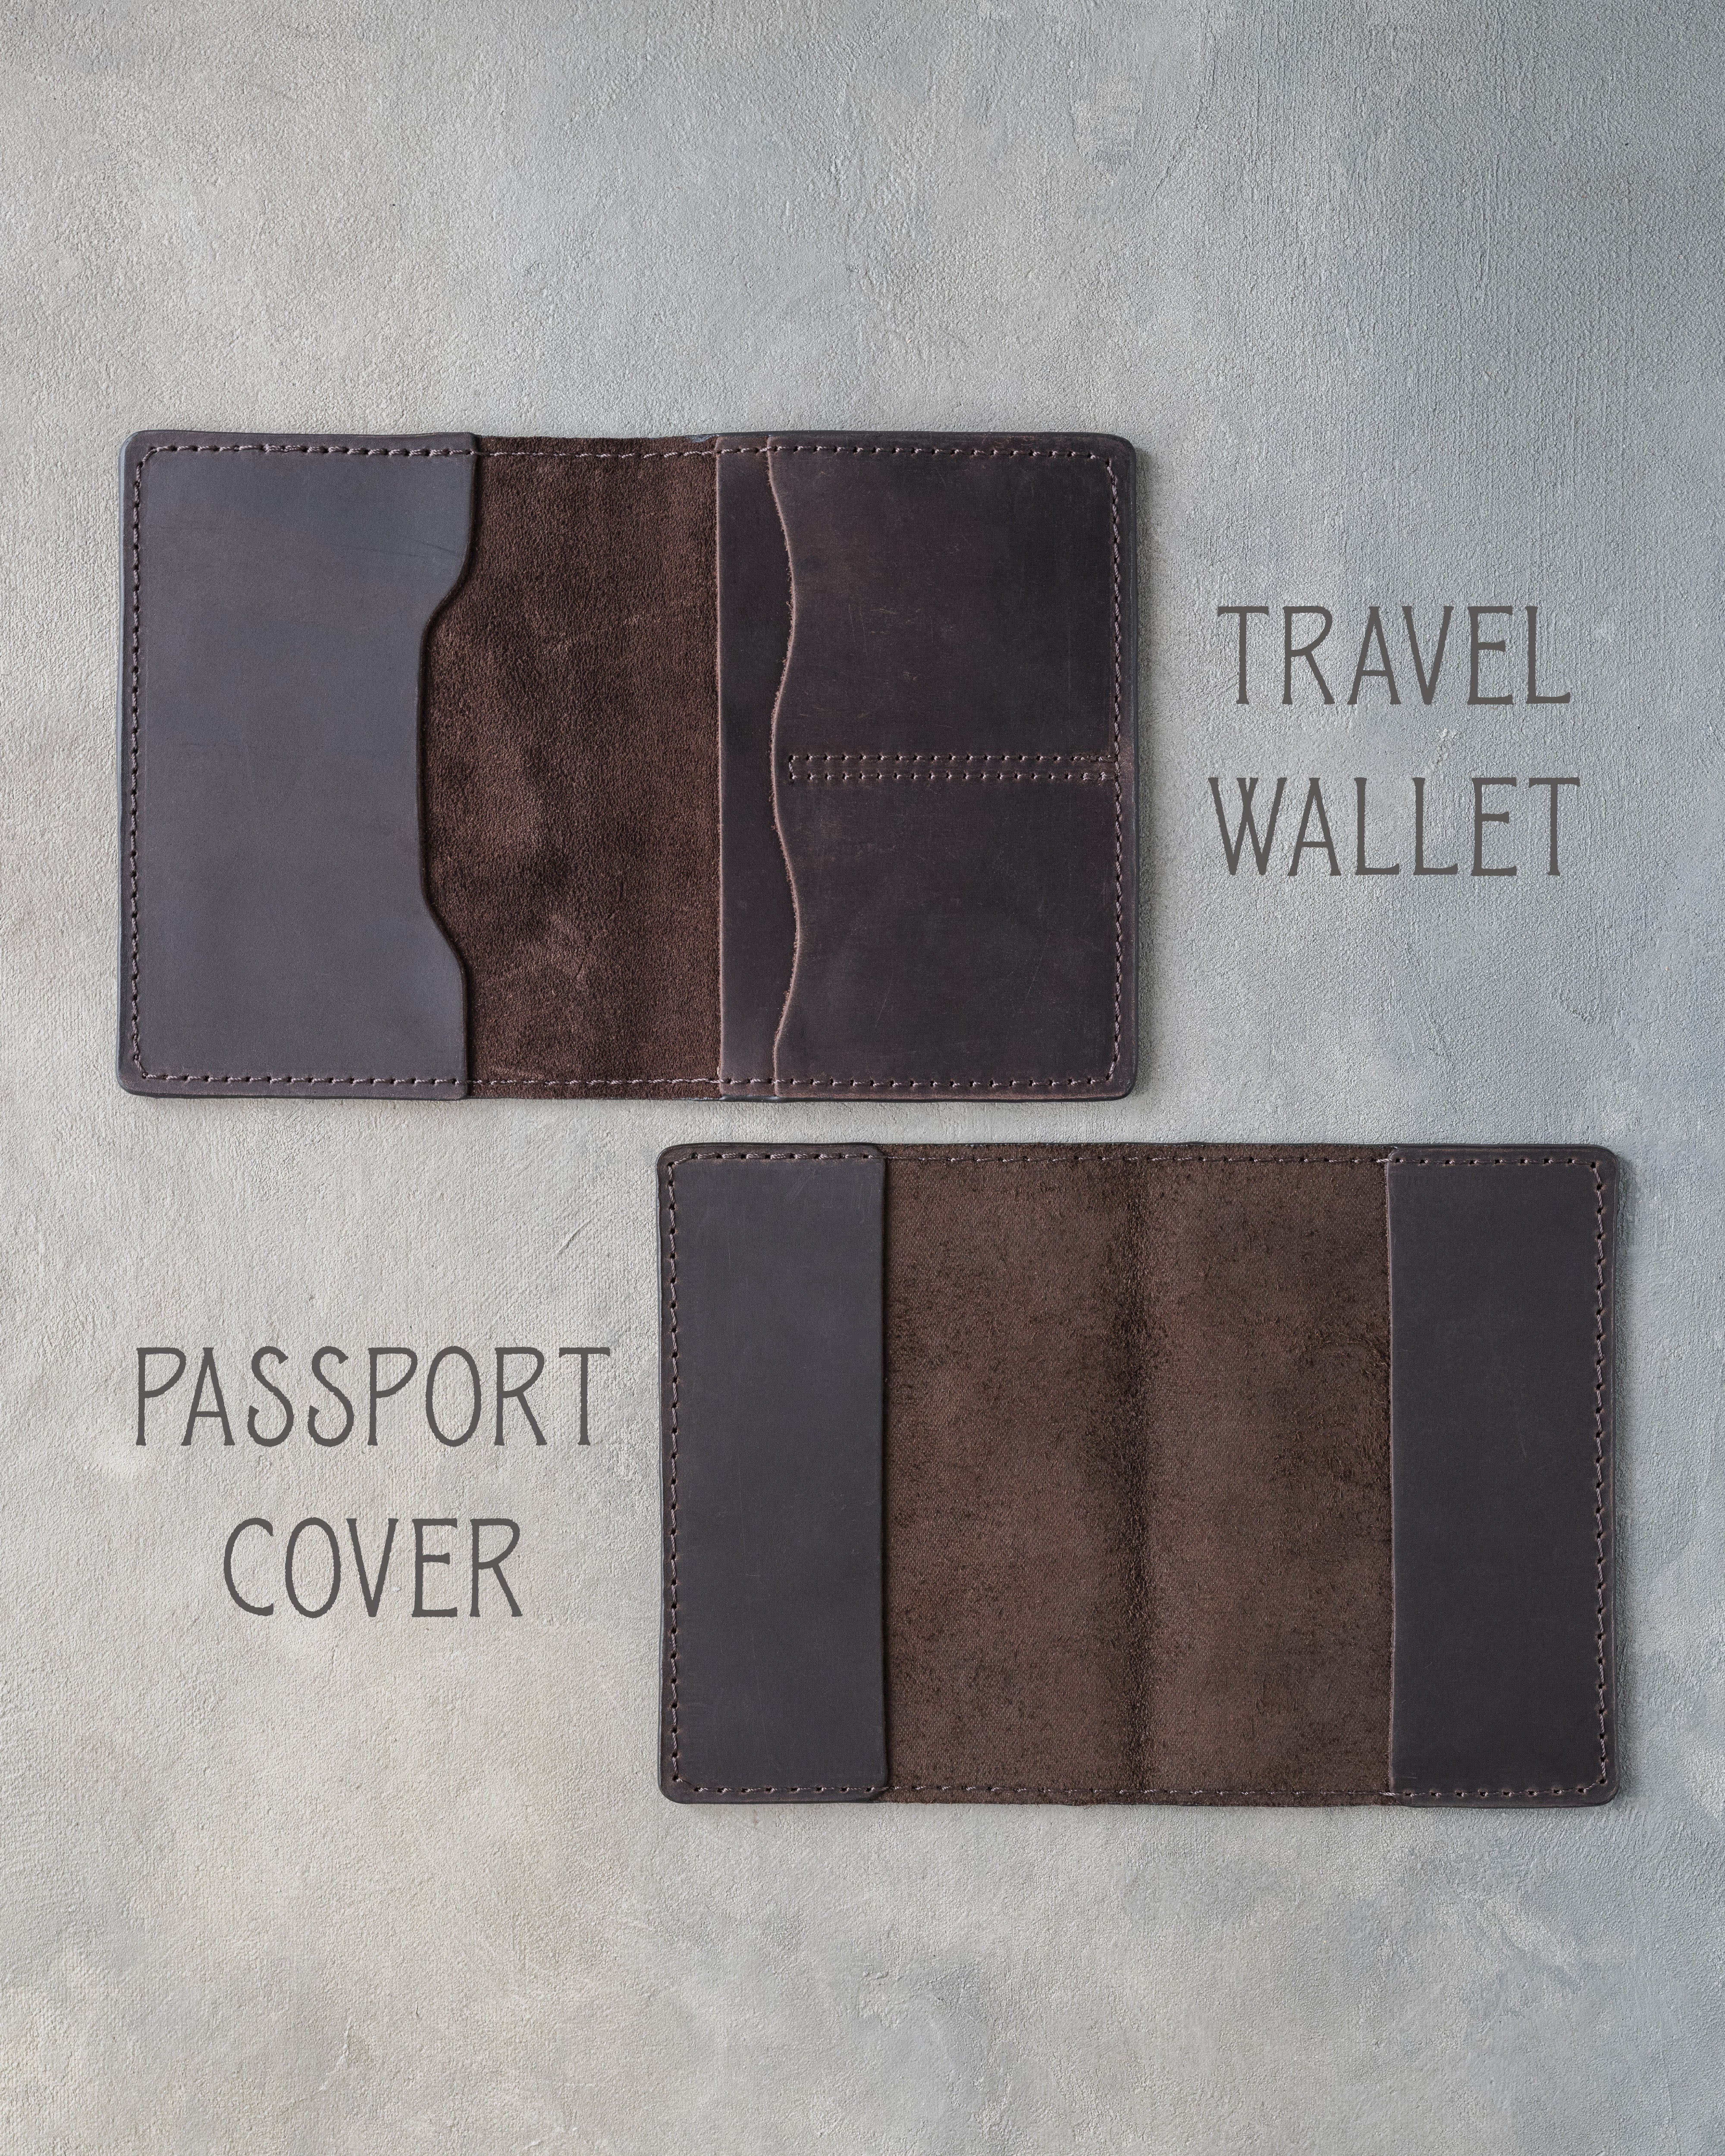 Personalized Passport Cover / Travel Wallet In Turquoise Leather